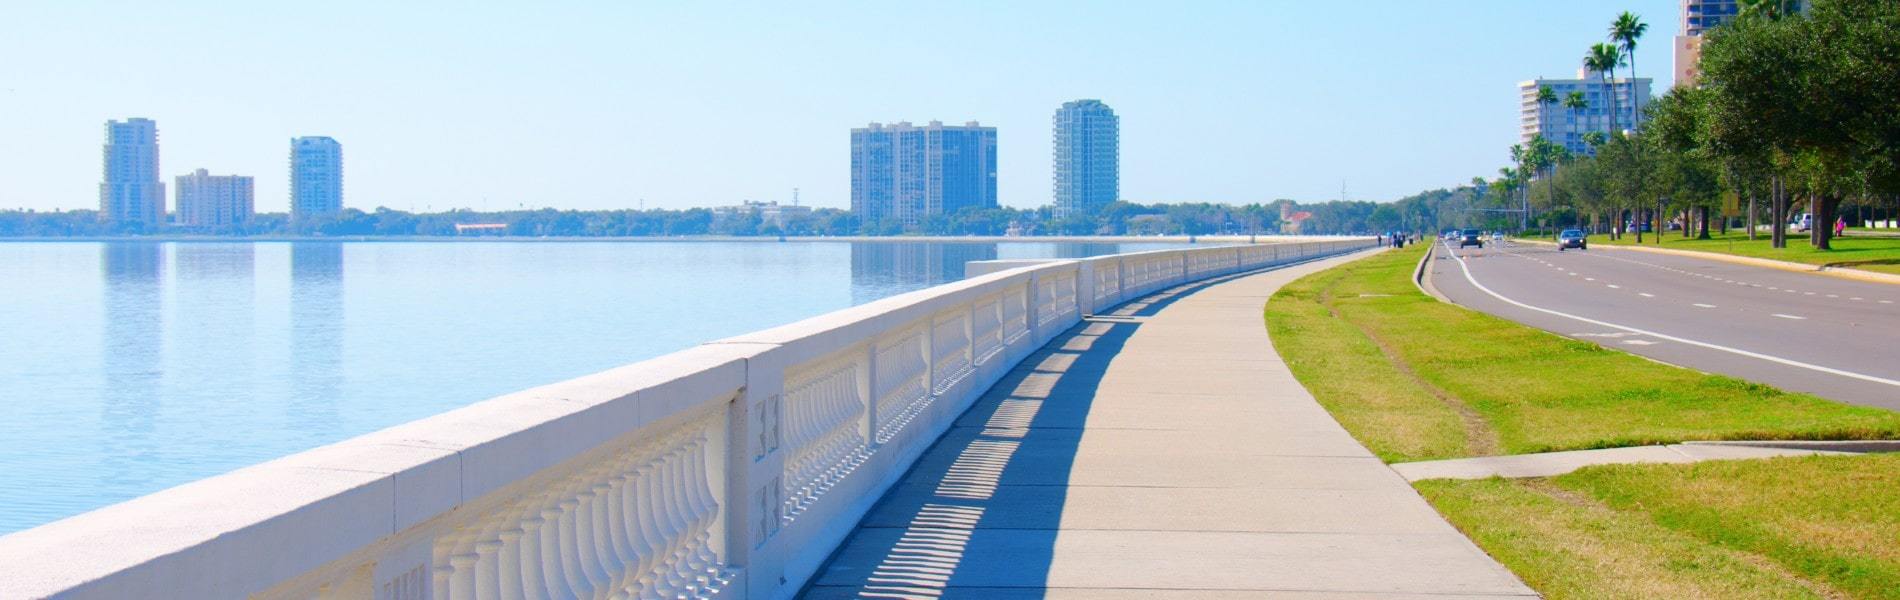 View from Bayshore Boulevard, near Bayshore homes for sale